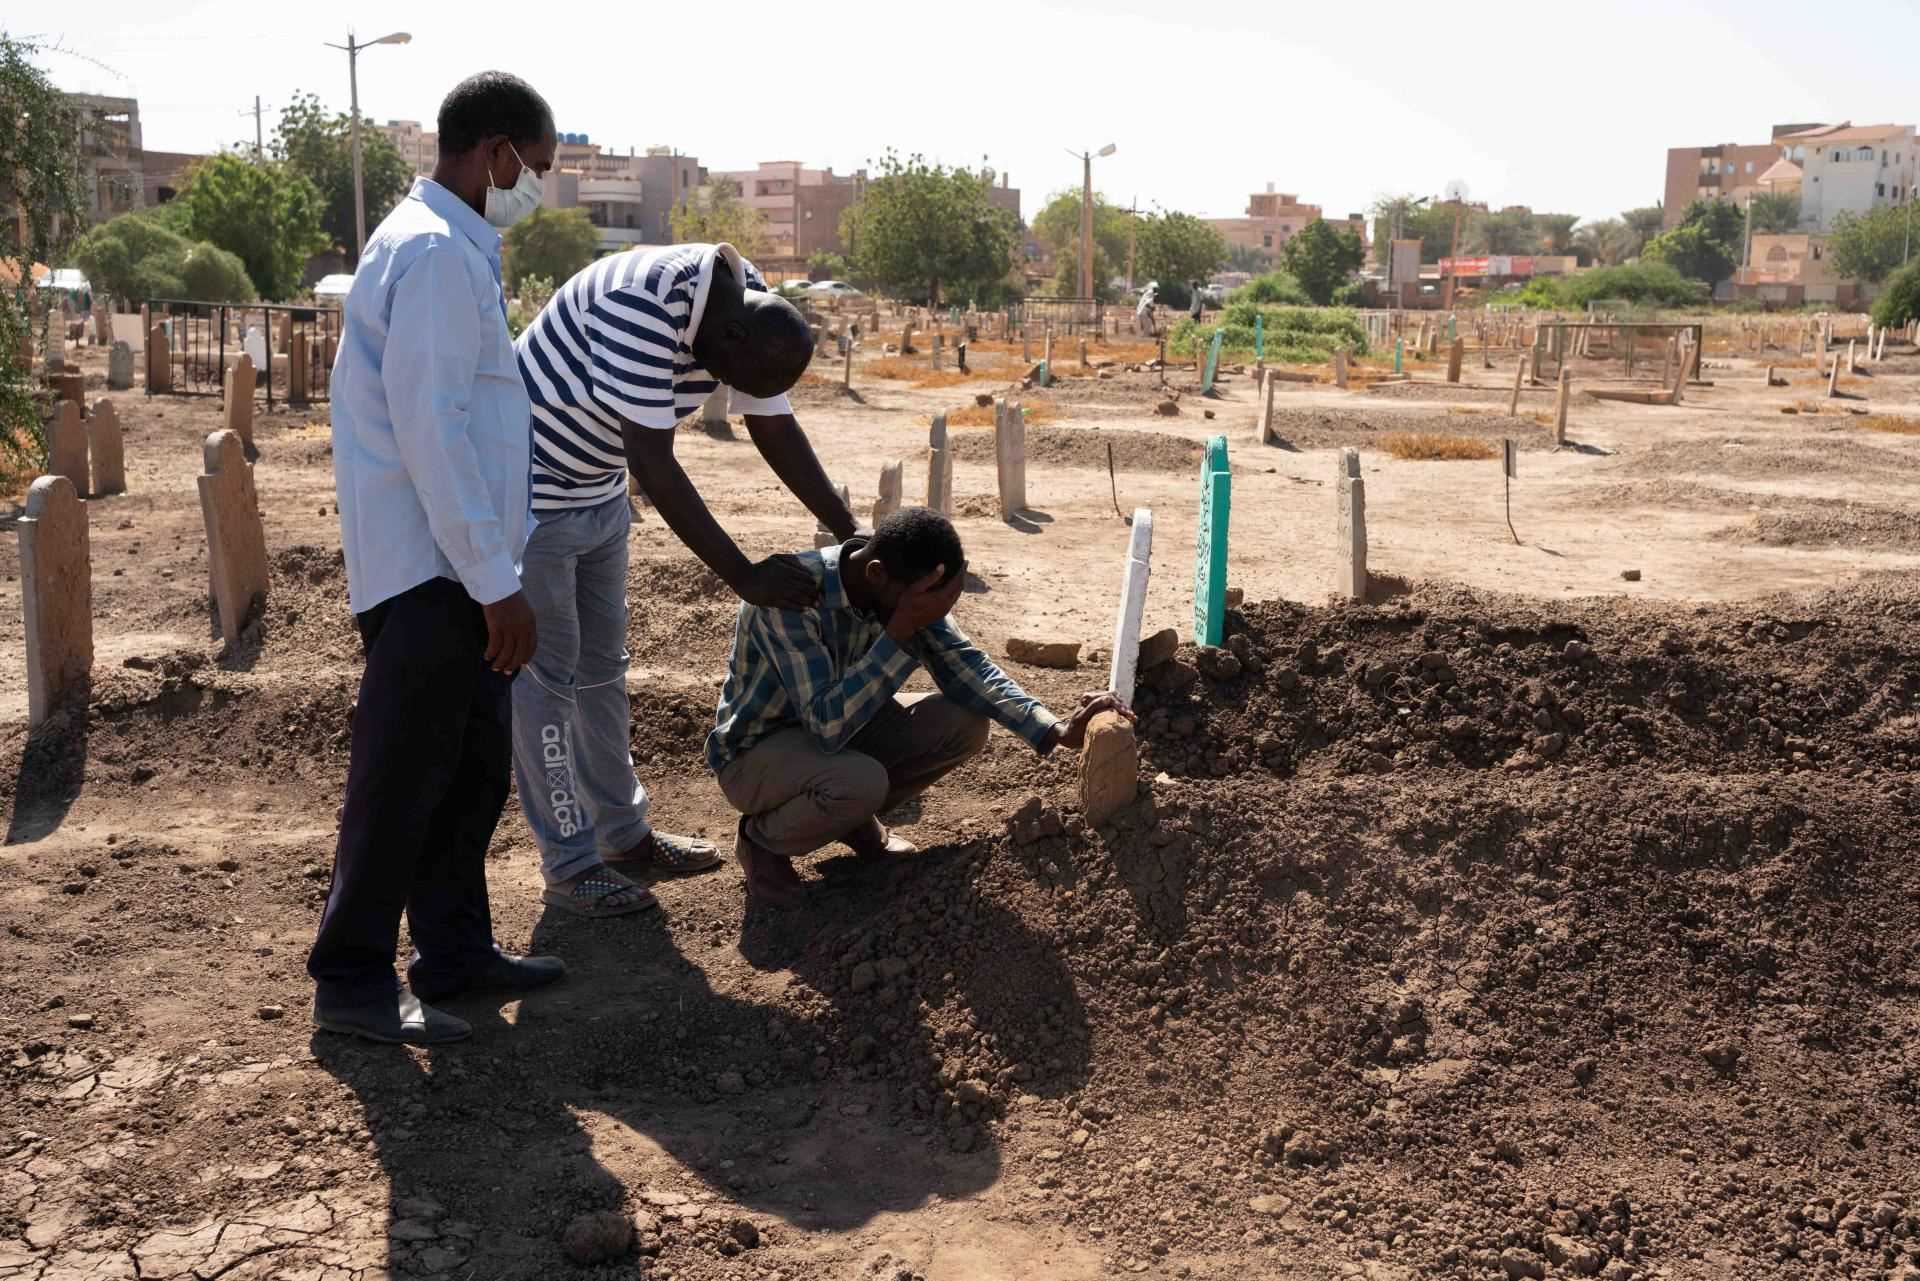 On November 18, 2021, 31-year-old Hani Alhadi cries next to the grave of his friend Louay Taj al-Sir, a teacher killed the day before in Bahri.  “We were colleagues at school.  We worked together and went through a lot.  We even ate together the day he died.  But he's no longer there, he's gone, ”he said.